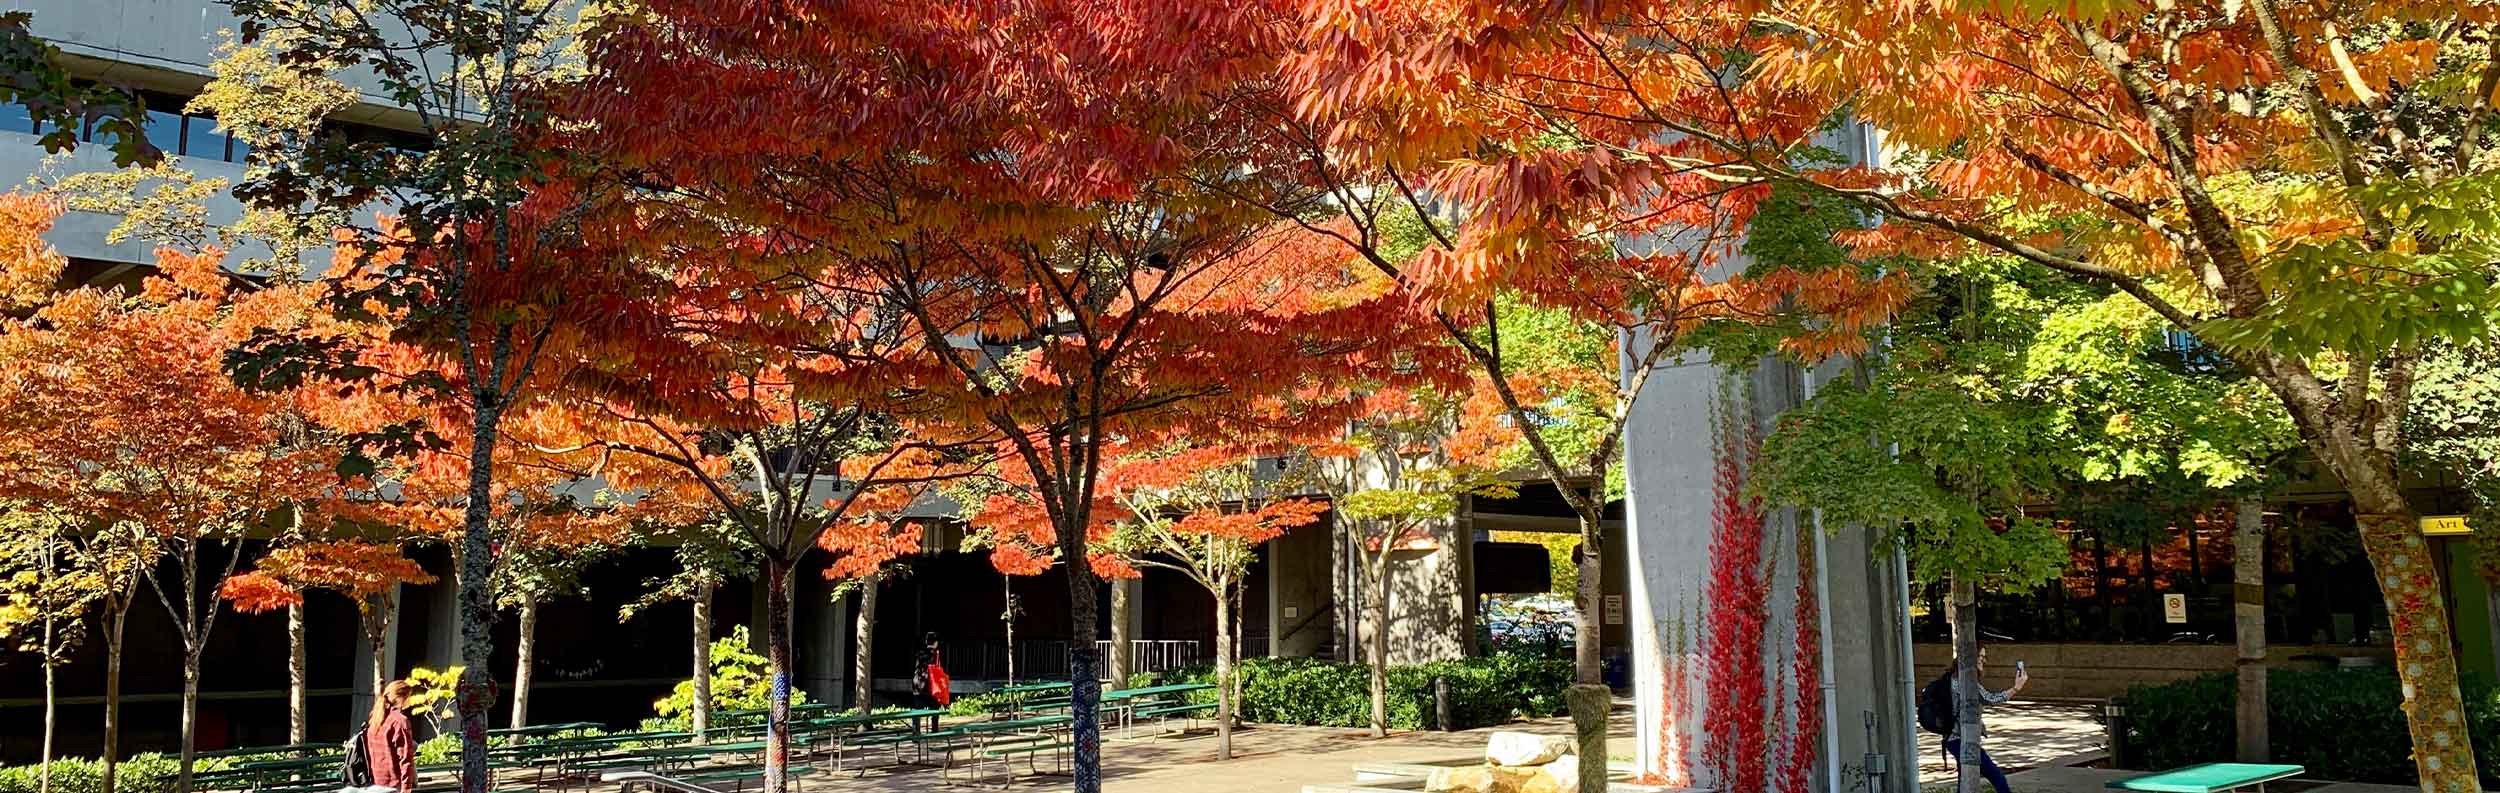  Red, orange, green leaves on trees with students walking in background 